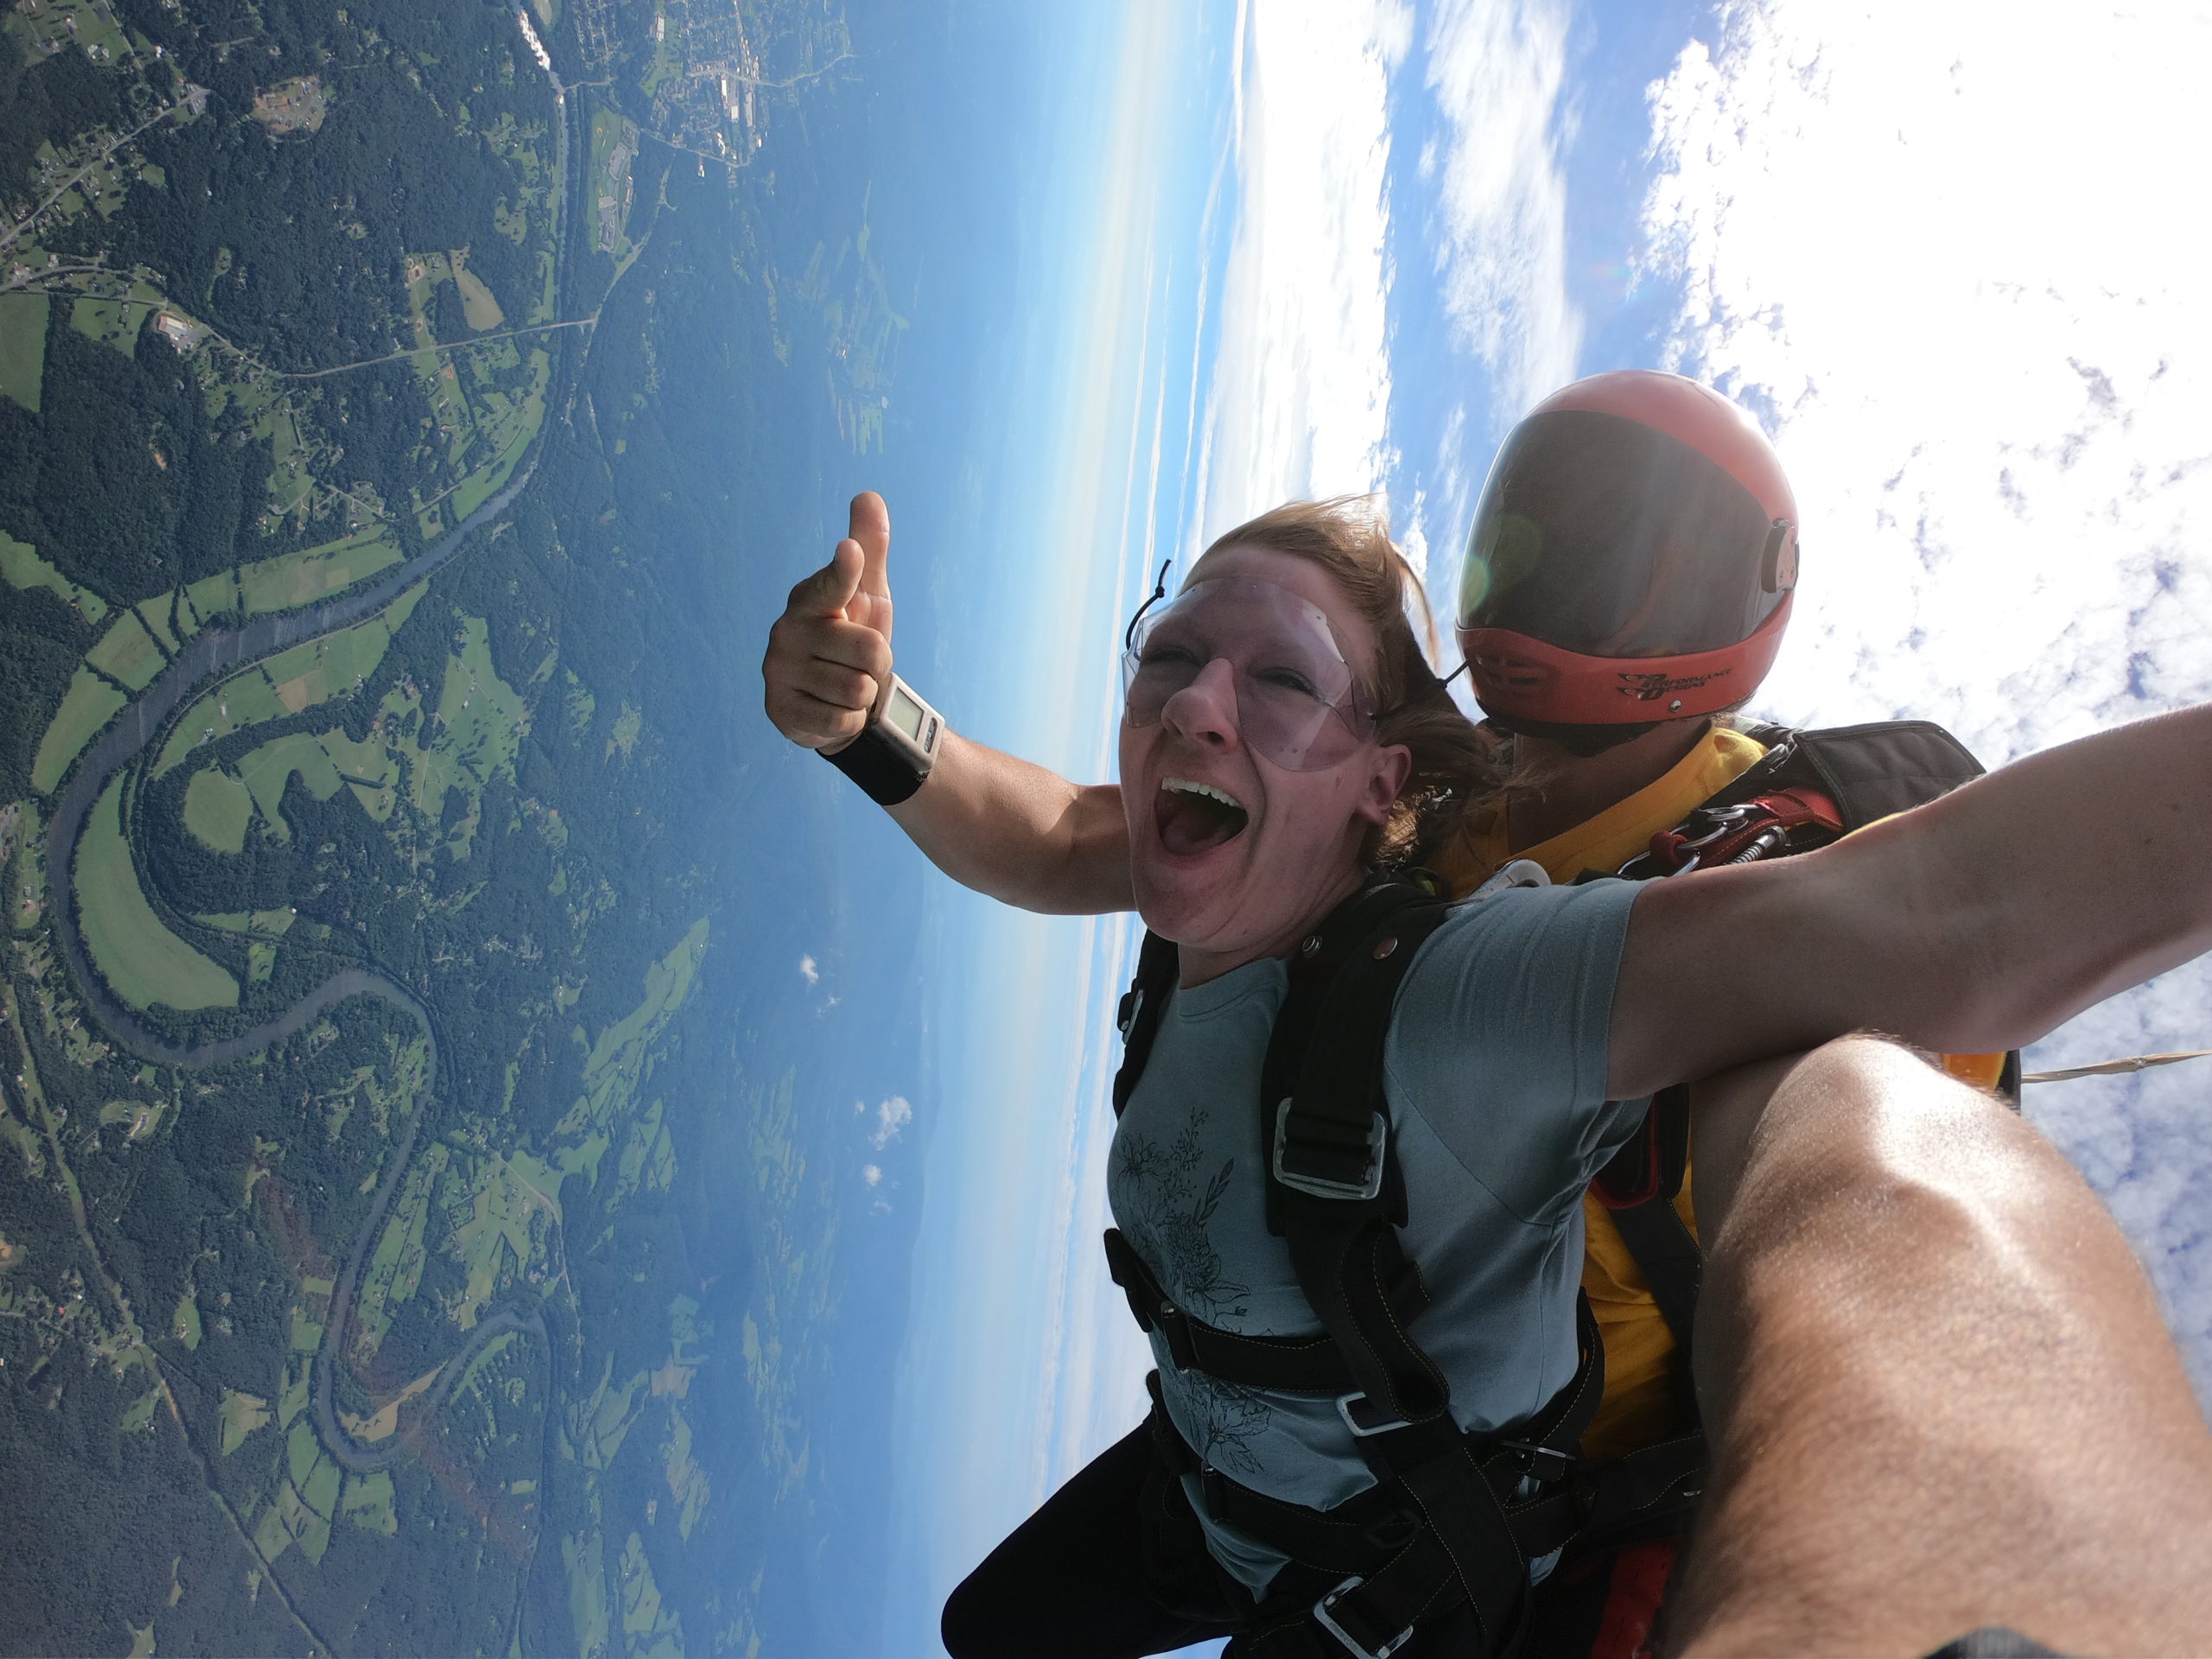 The Best Skydiving Experience in Northern Virginia Skydive Front Royal